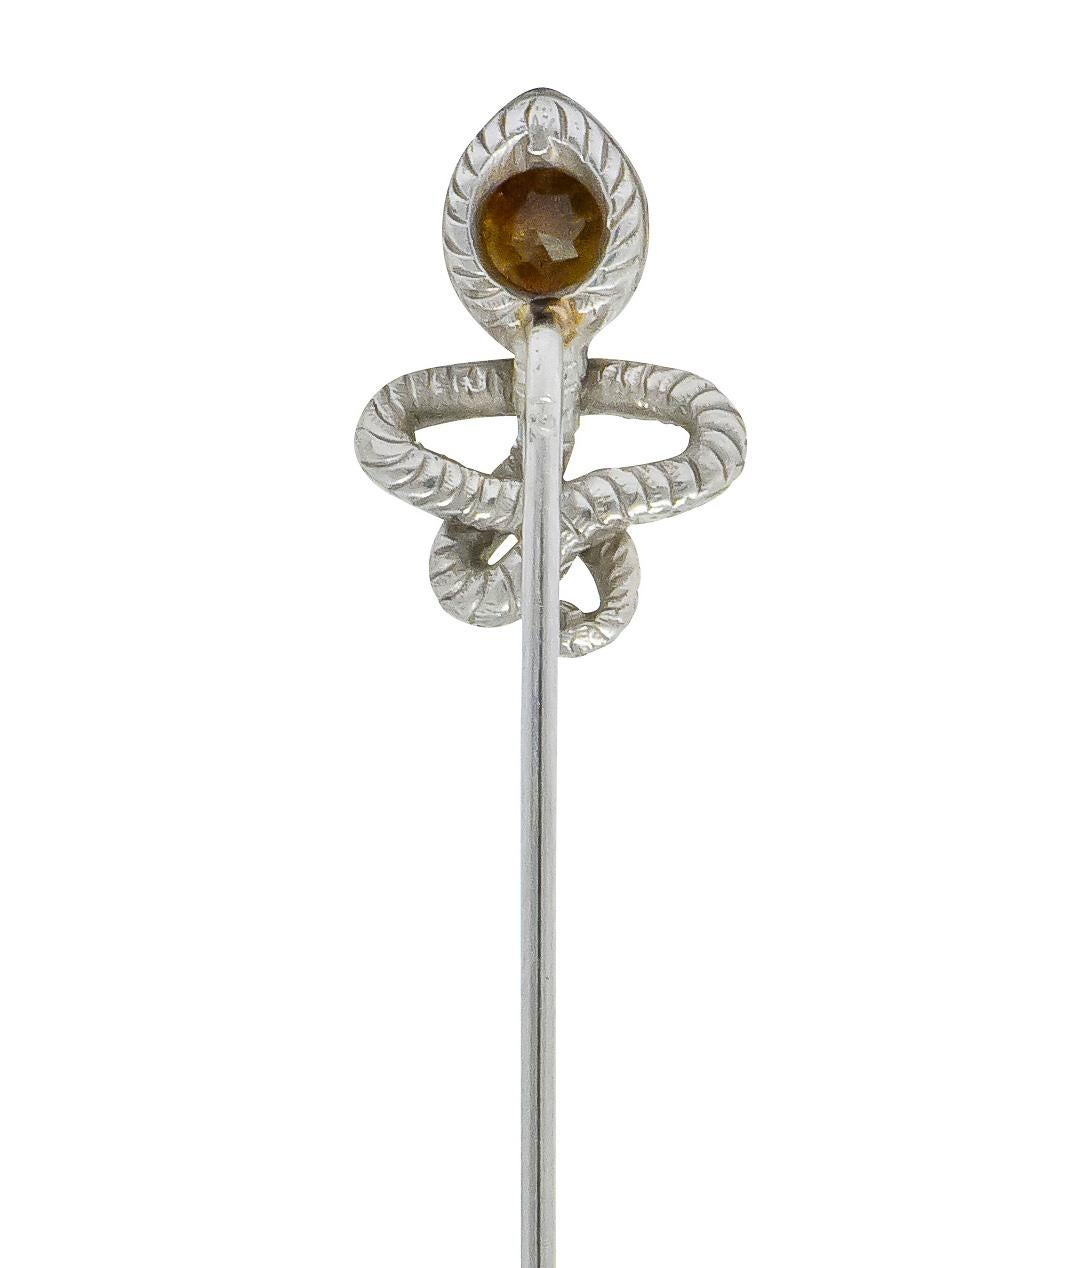 Edwardian 1.15 Carat Tourmaline Platinum Intertwined Snake Stickpin In Excellent Condition For Sale In Philadelphia, PA